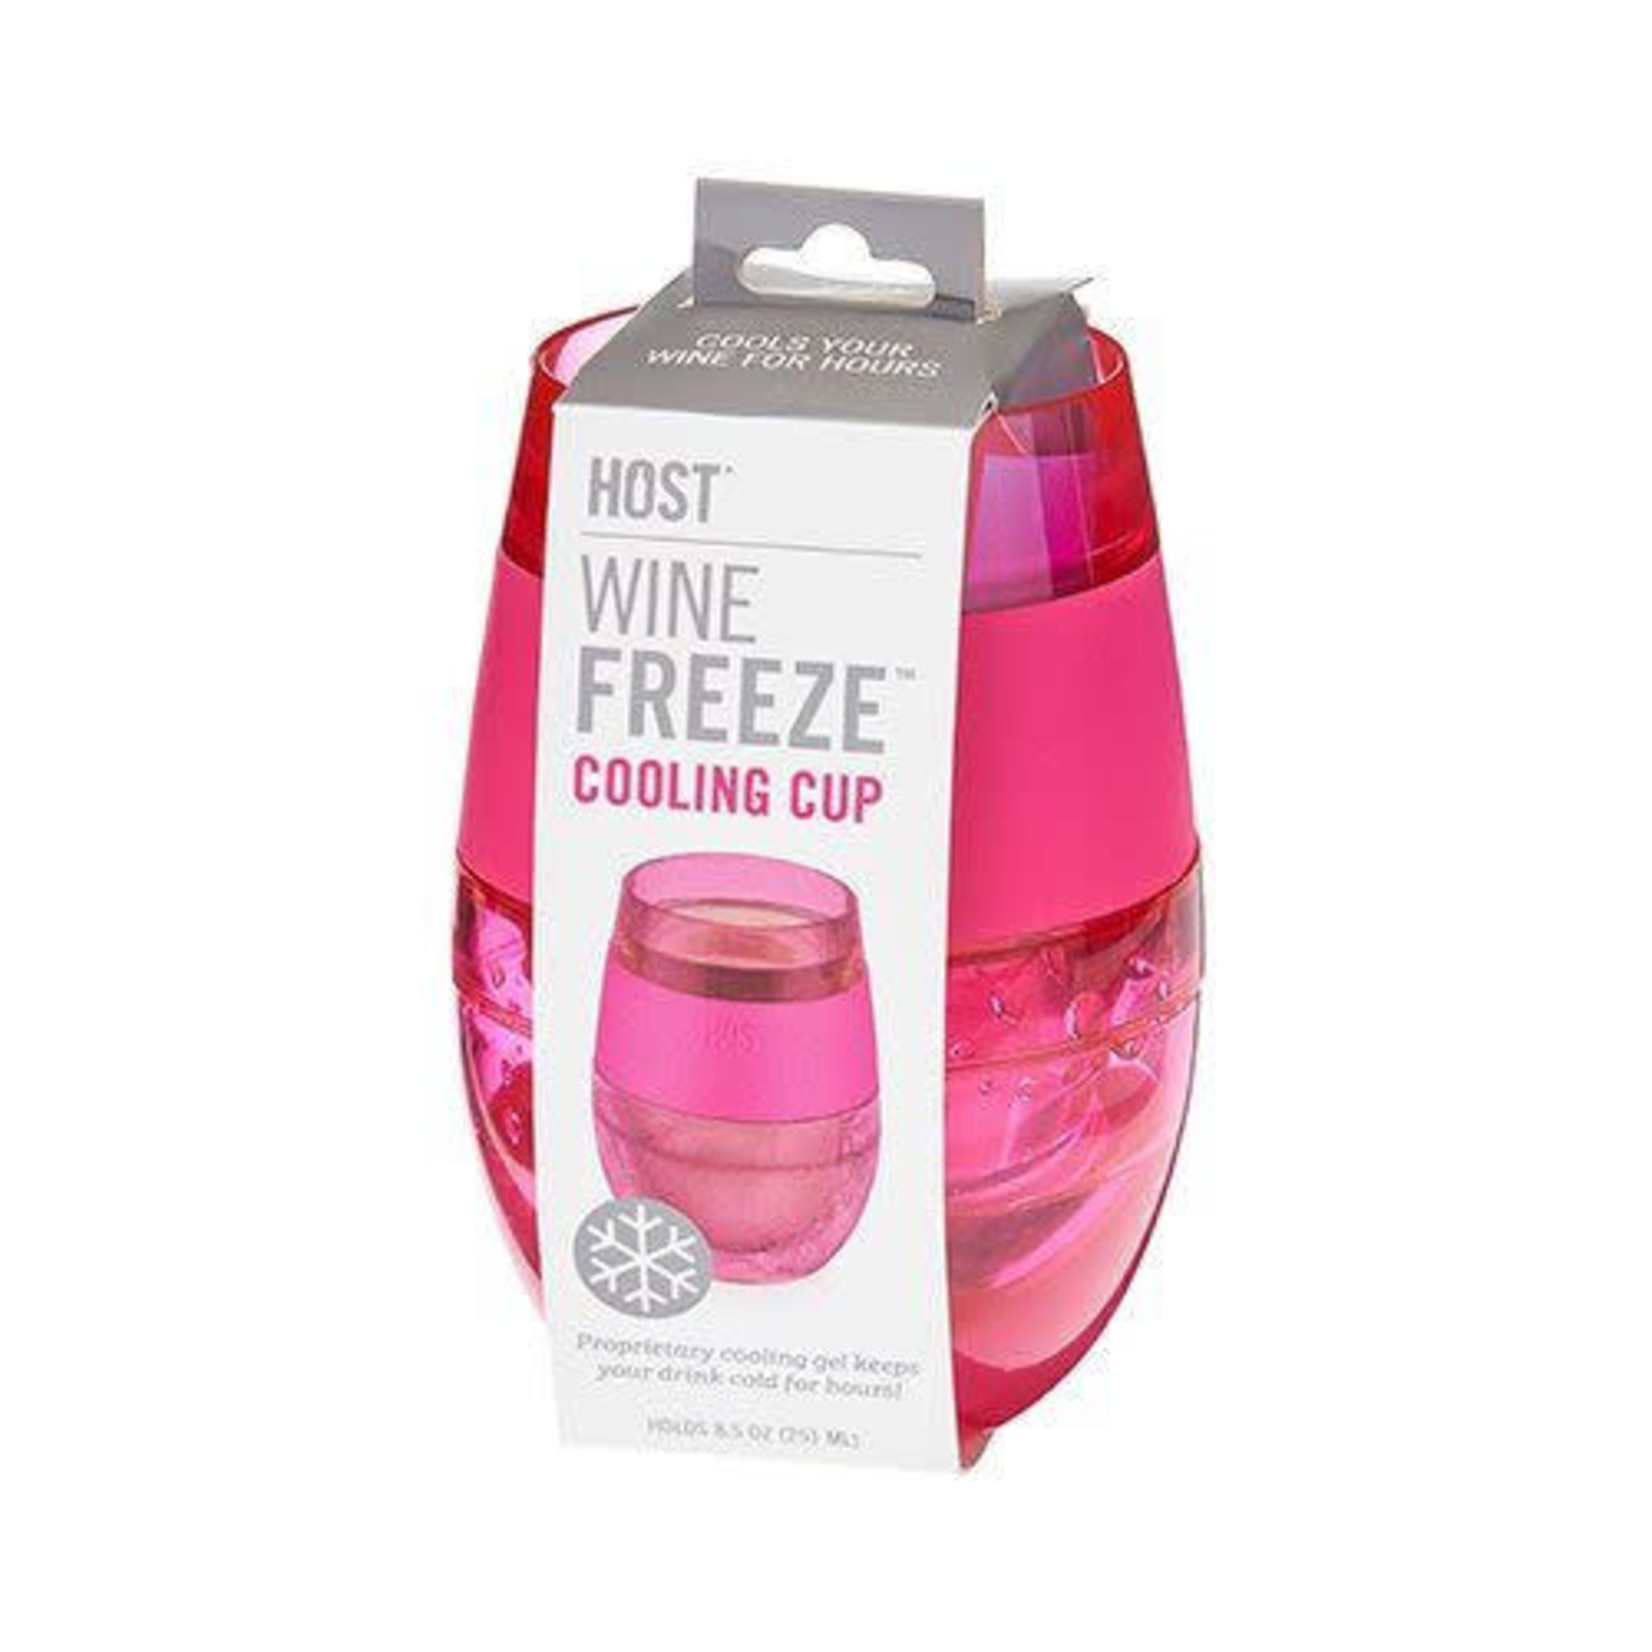 Host Wine FREEZE Cooling Cup